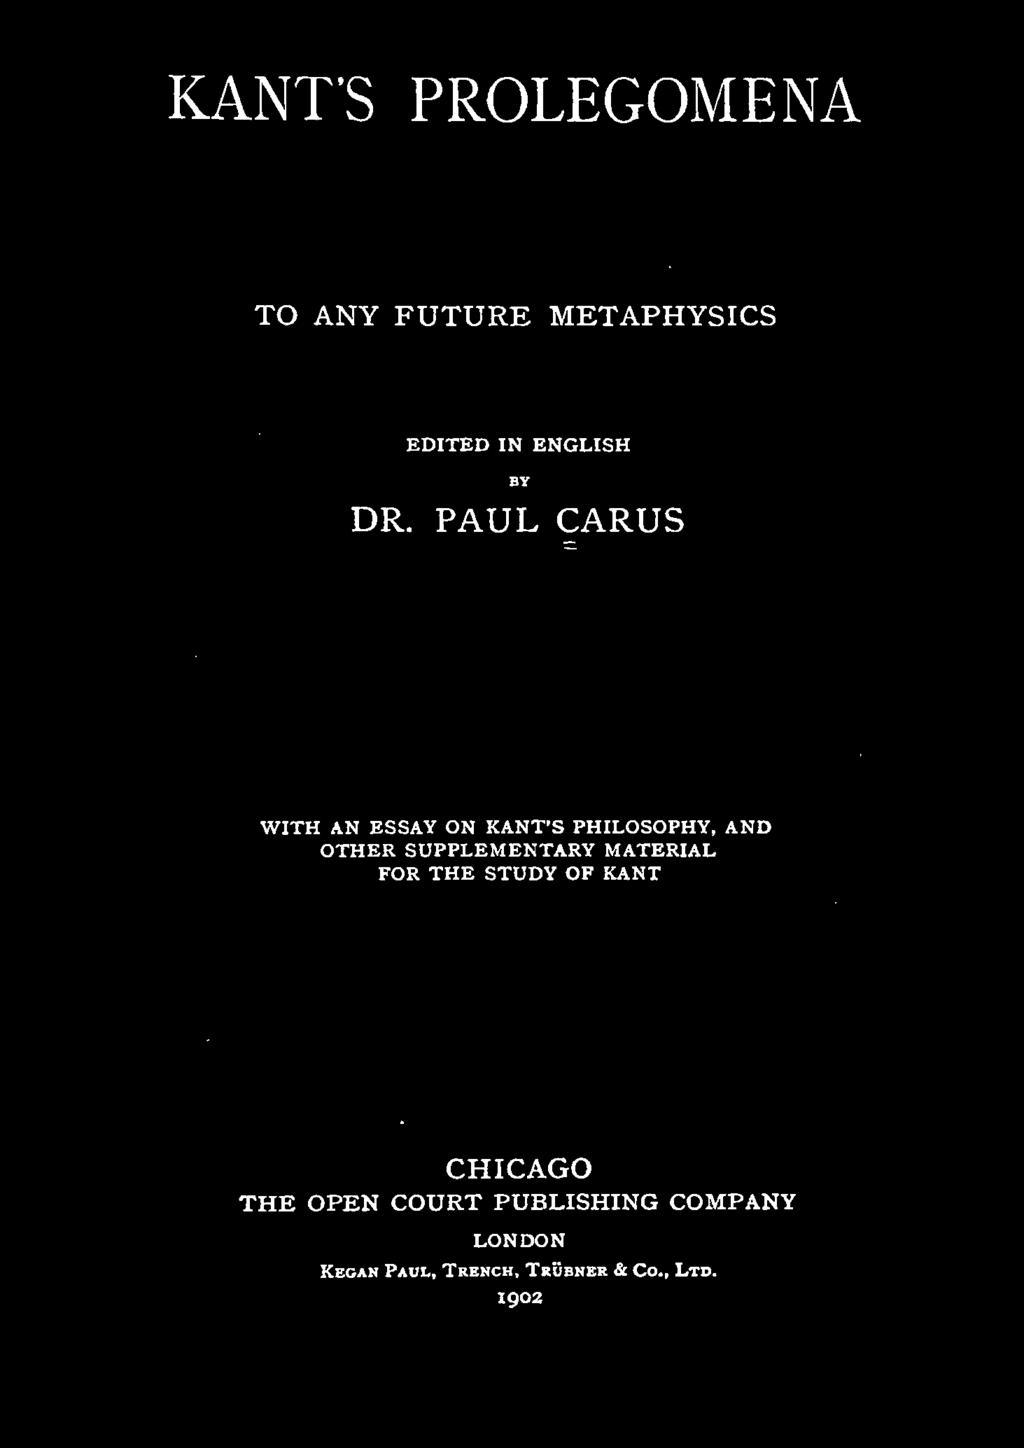 SUPPLEMENTARY MATERIAL FOR THE STUDY OF KANT CHICAGO THE OPEN